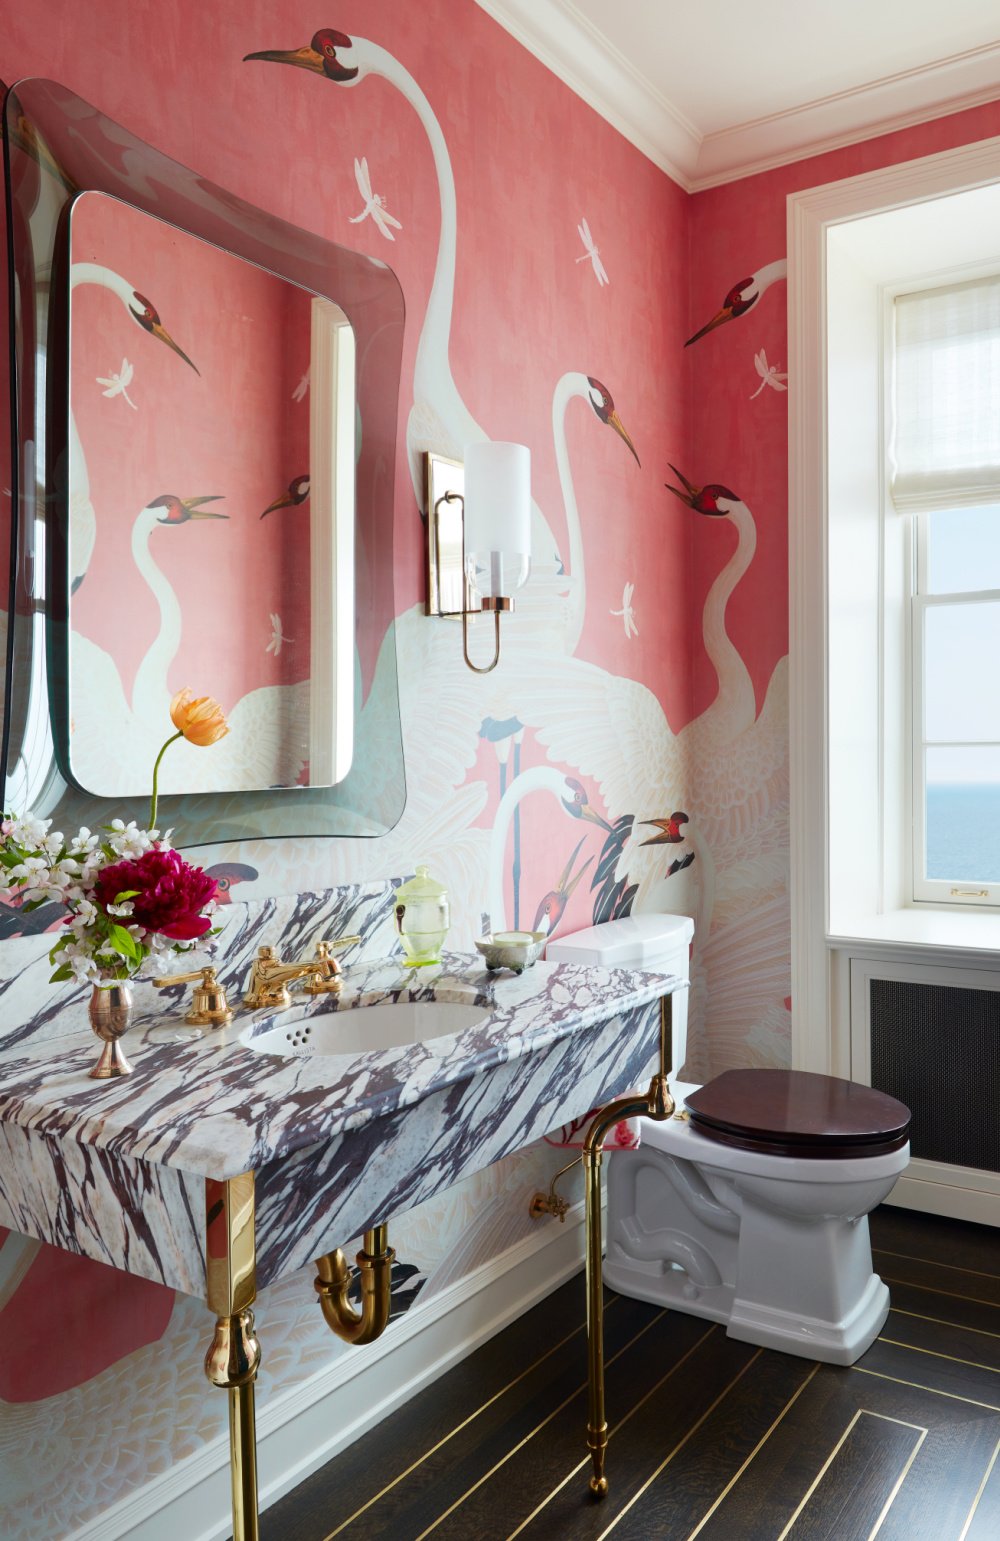 Summer Thornton designed bathroom wallpapered with whimsical giant white cranes on a hot pink background. Luxurious marble console sink and FontanaArte mirror. From WONDERLAND: Adventures in Decorating (Rizzoli, 2022). #summerthornton